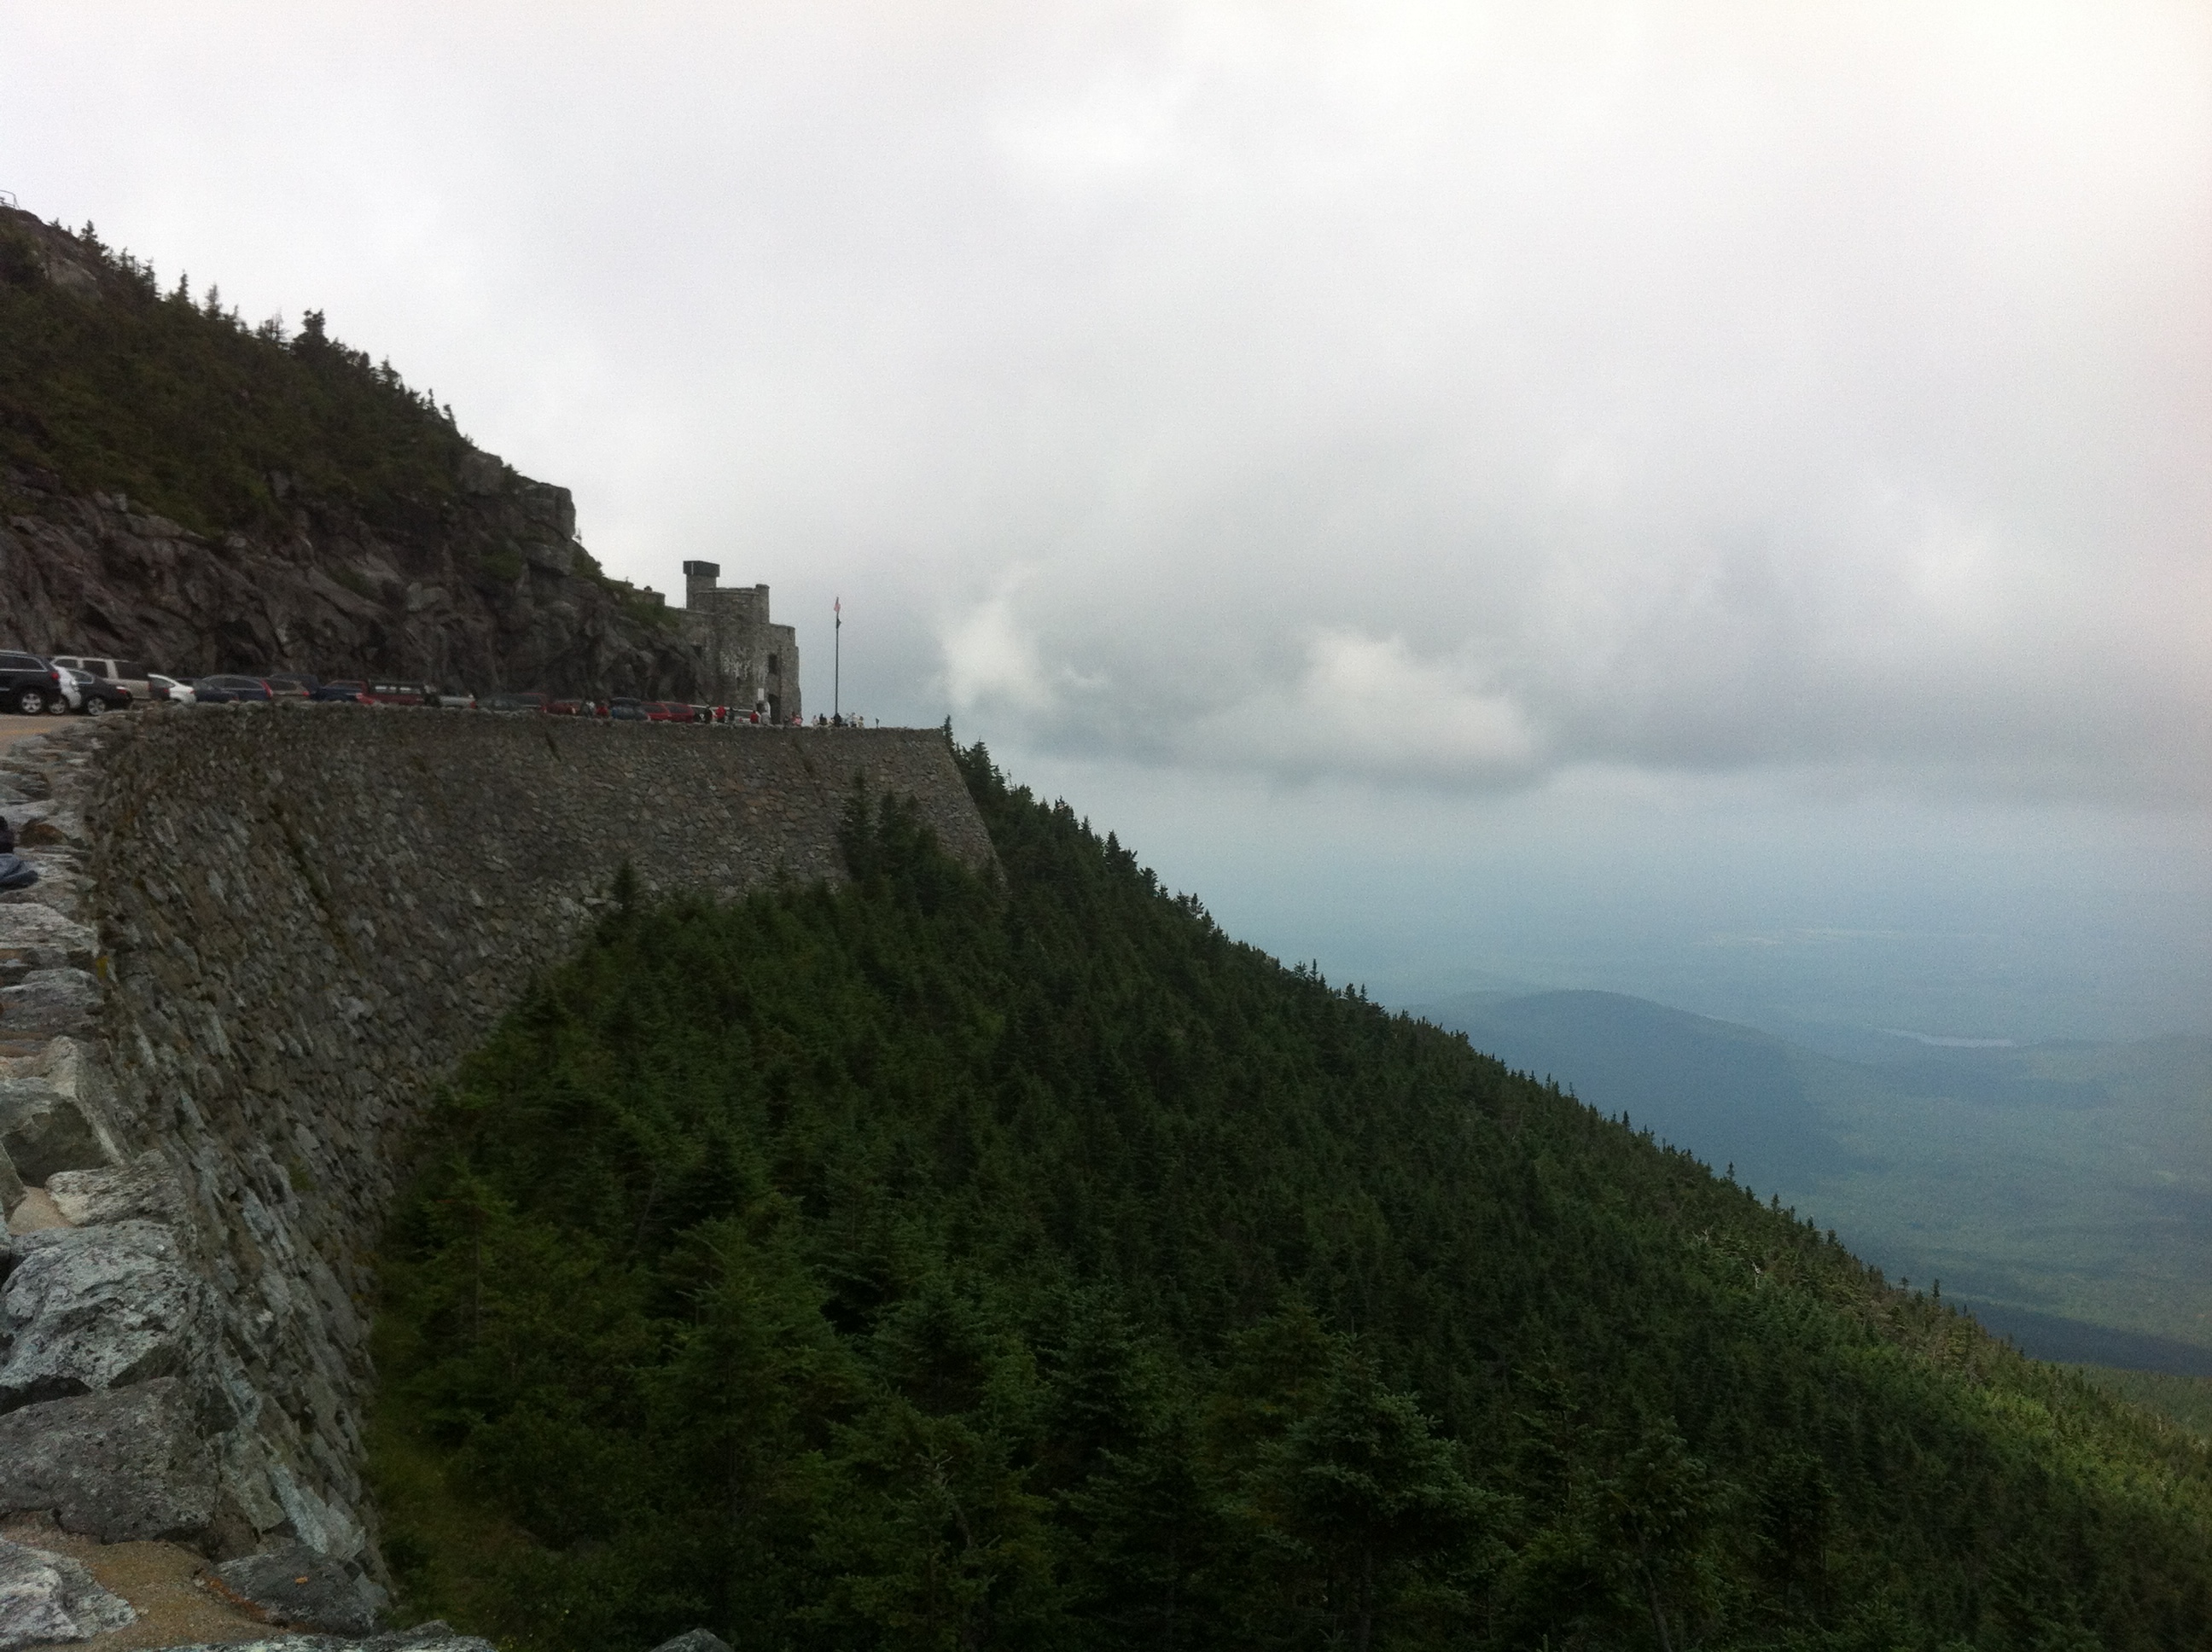 Approaching the castle atop Whiteface Mountain.